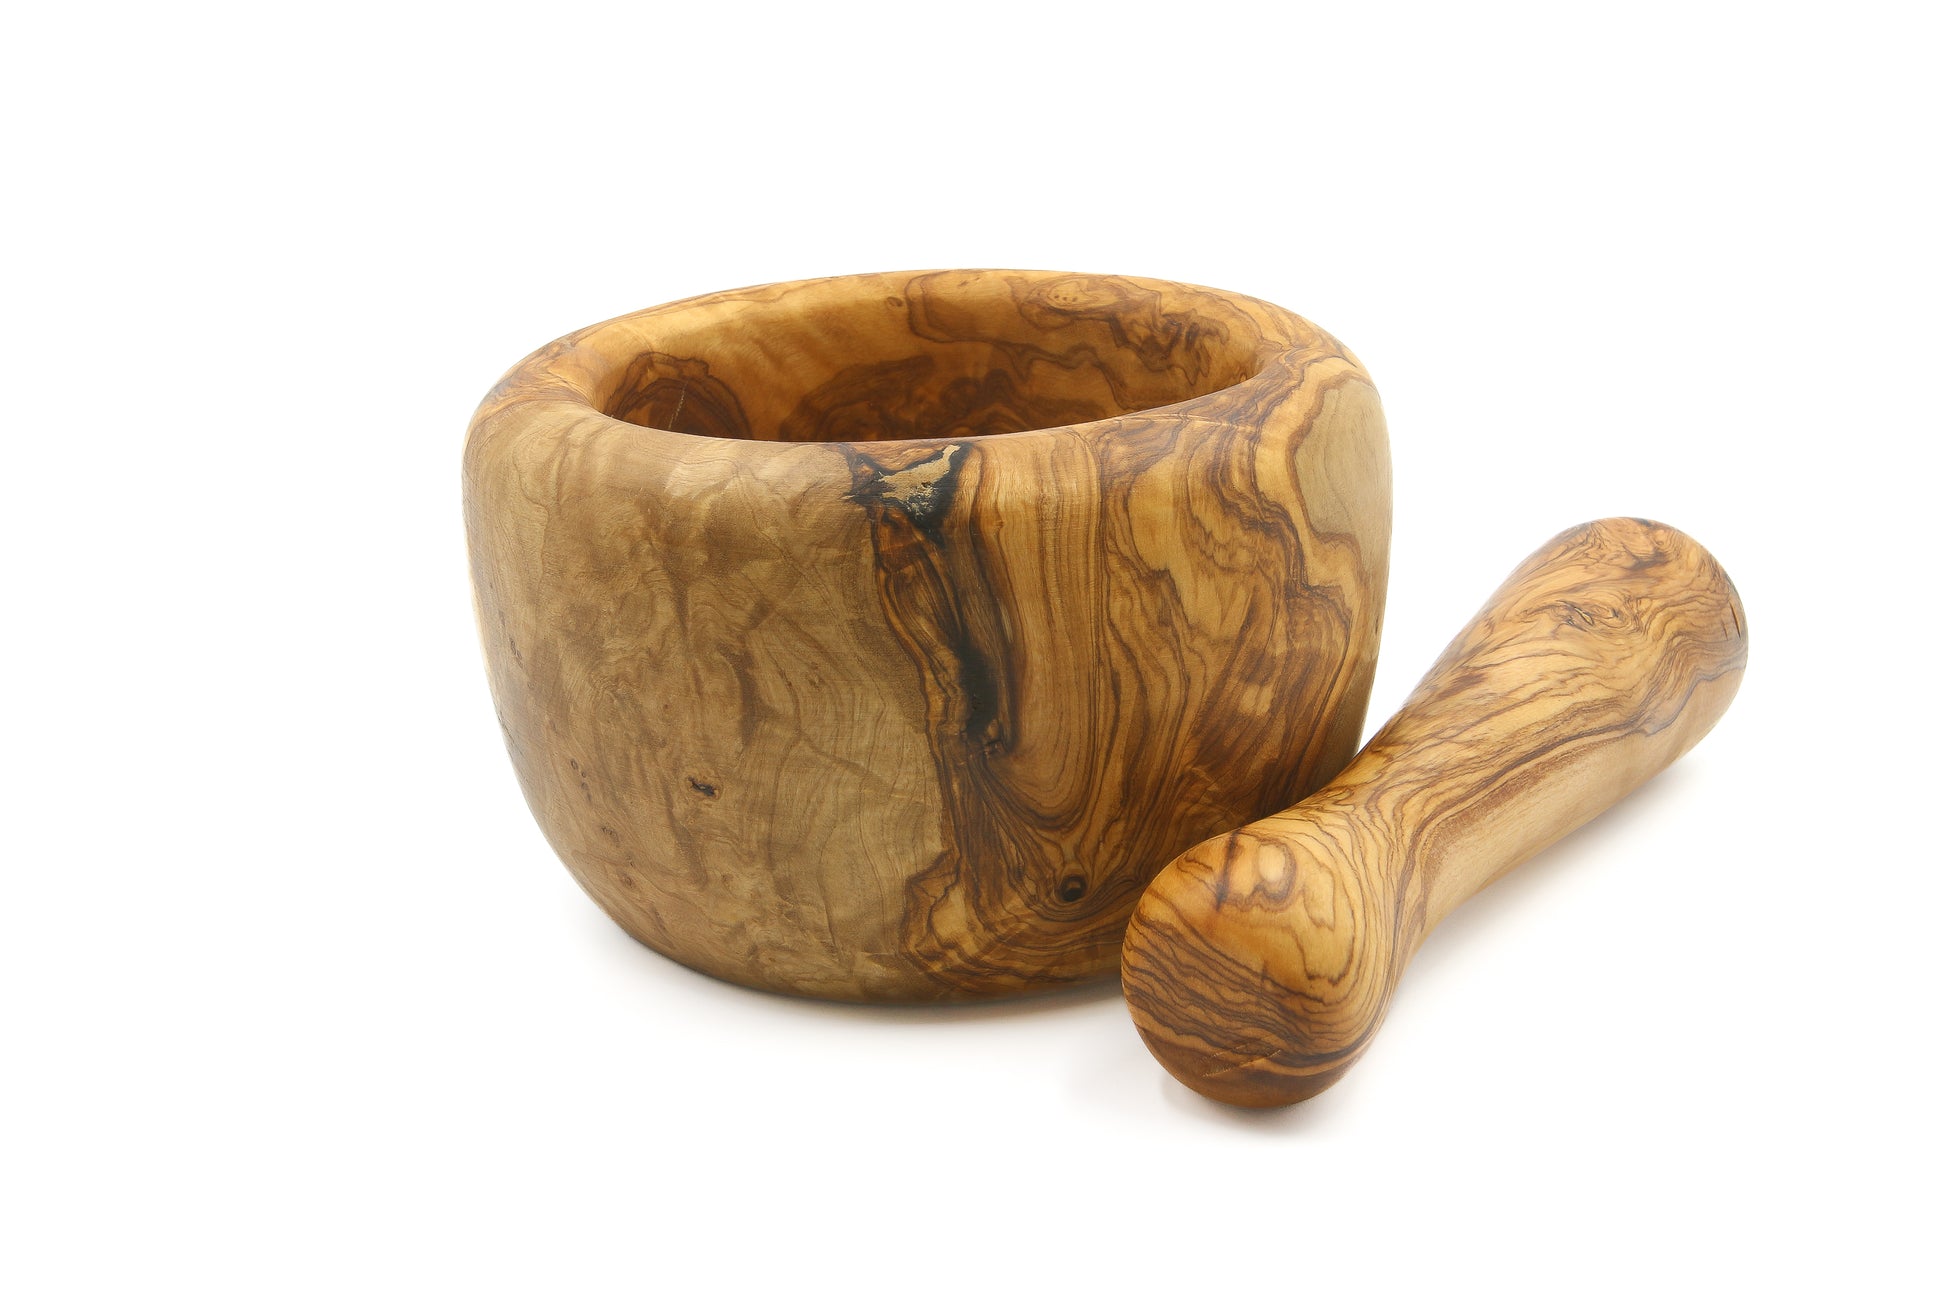 Handcrafted olive wood mortar and pestle for grinding